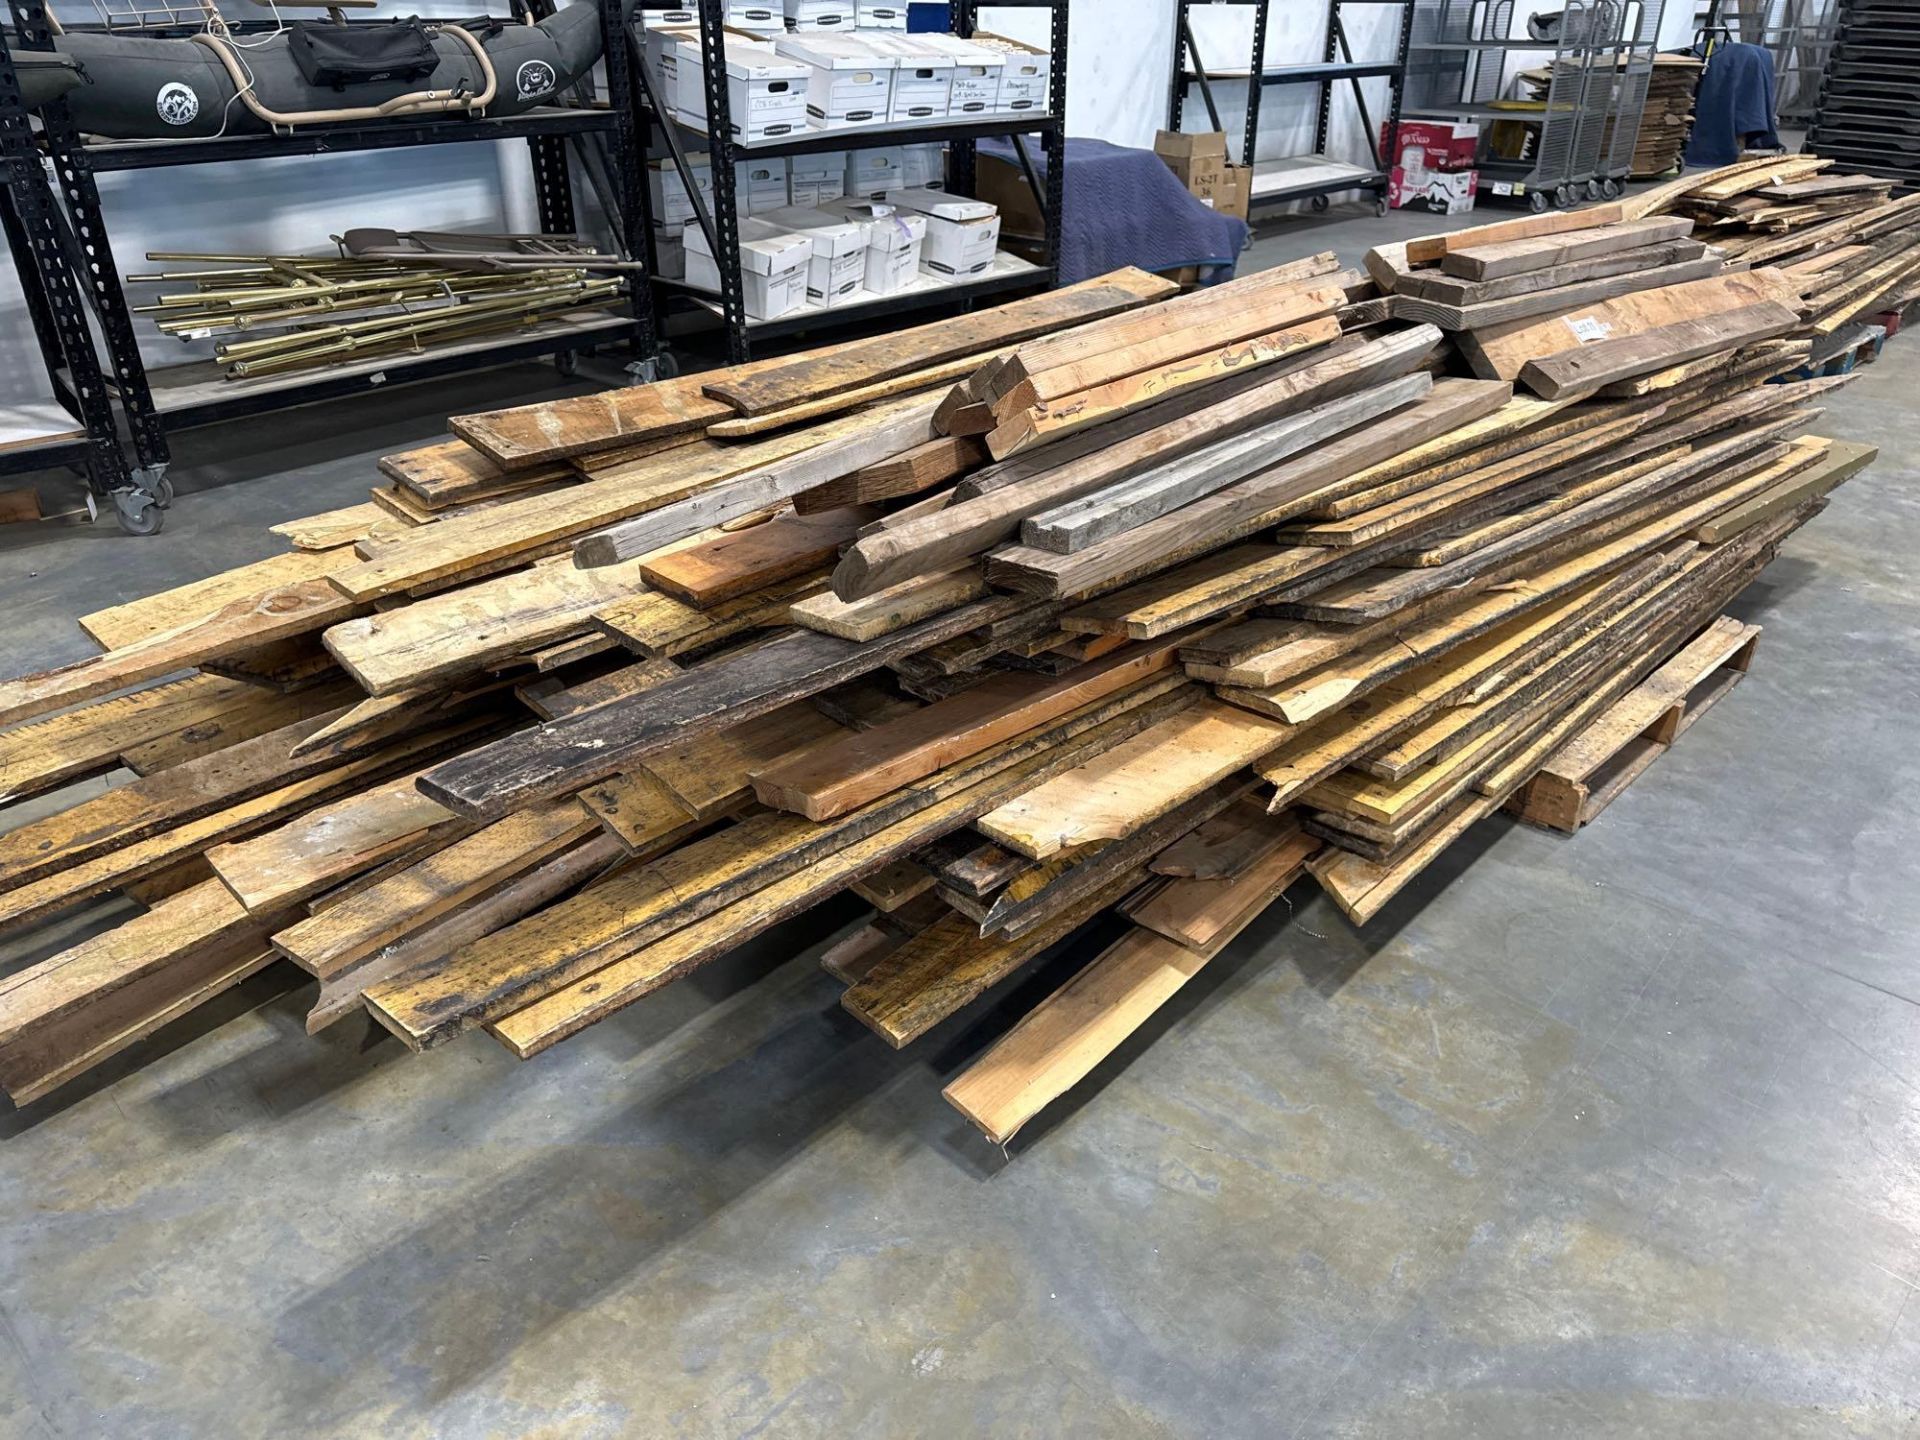 Two stacks of Reclaimed flooring from claim jumper steak house - Image 3 of 5